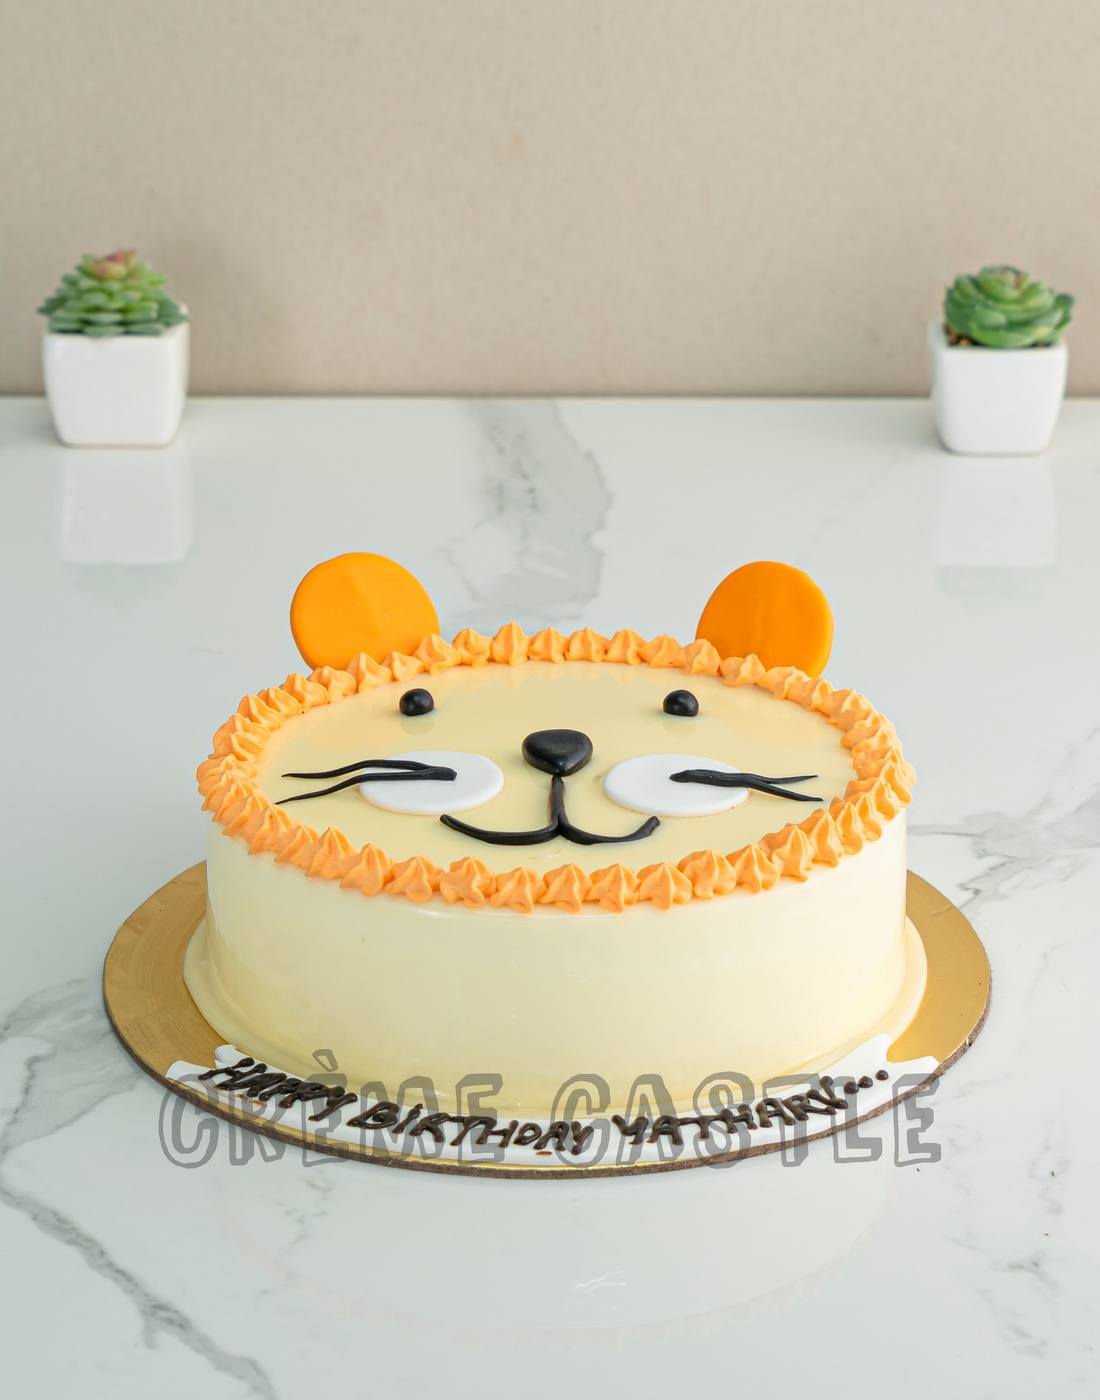 Puppy Face, Kitty or Puppy Face: elé Cake Co.